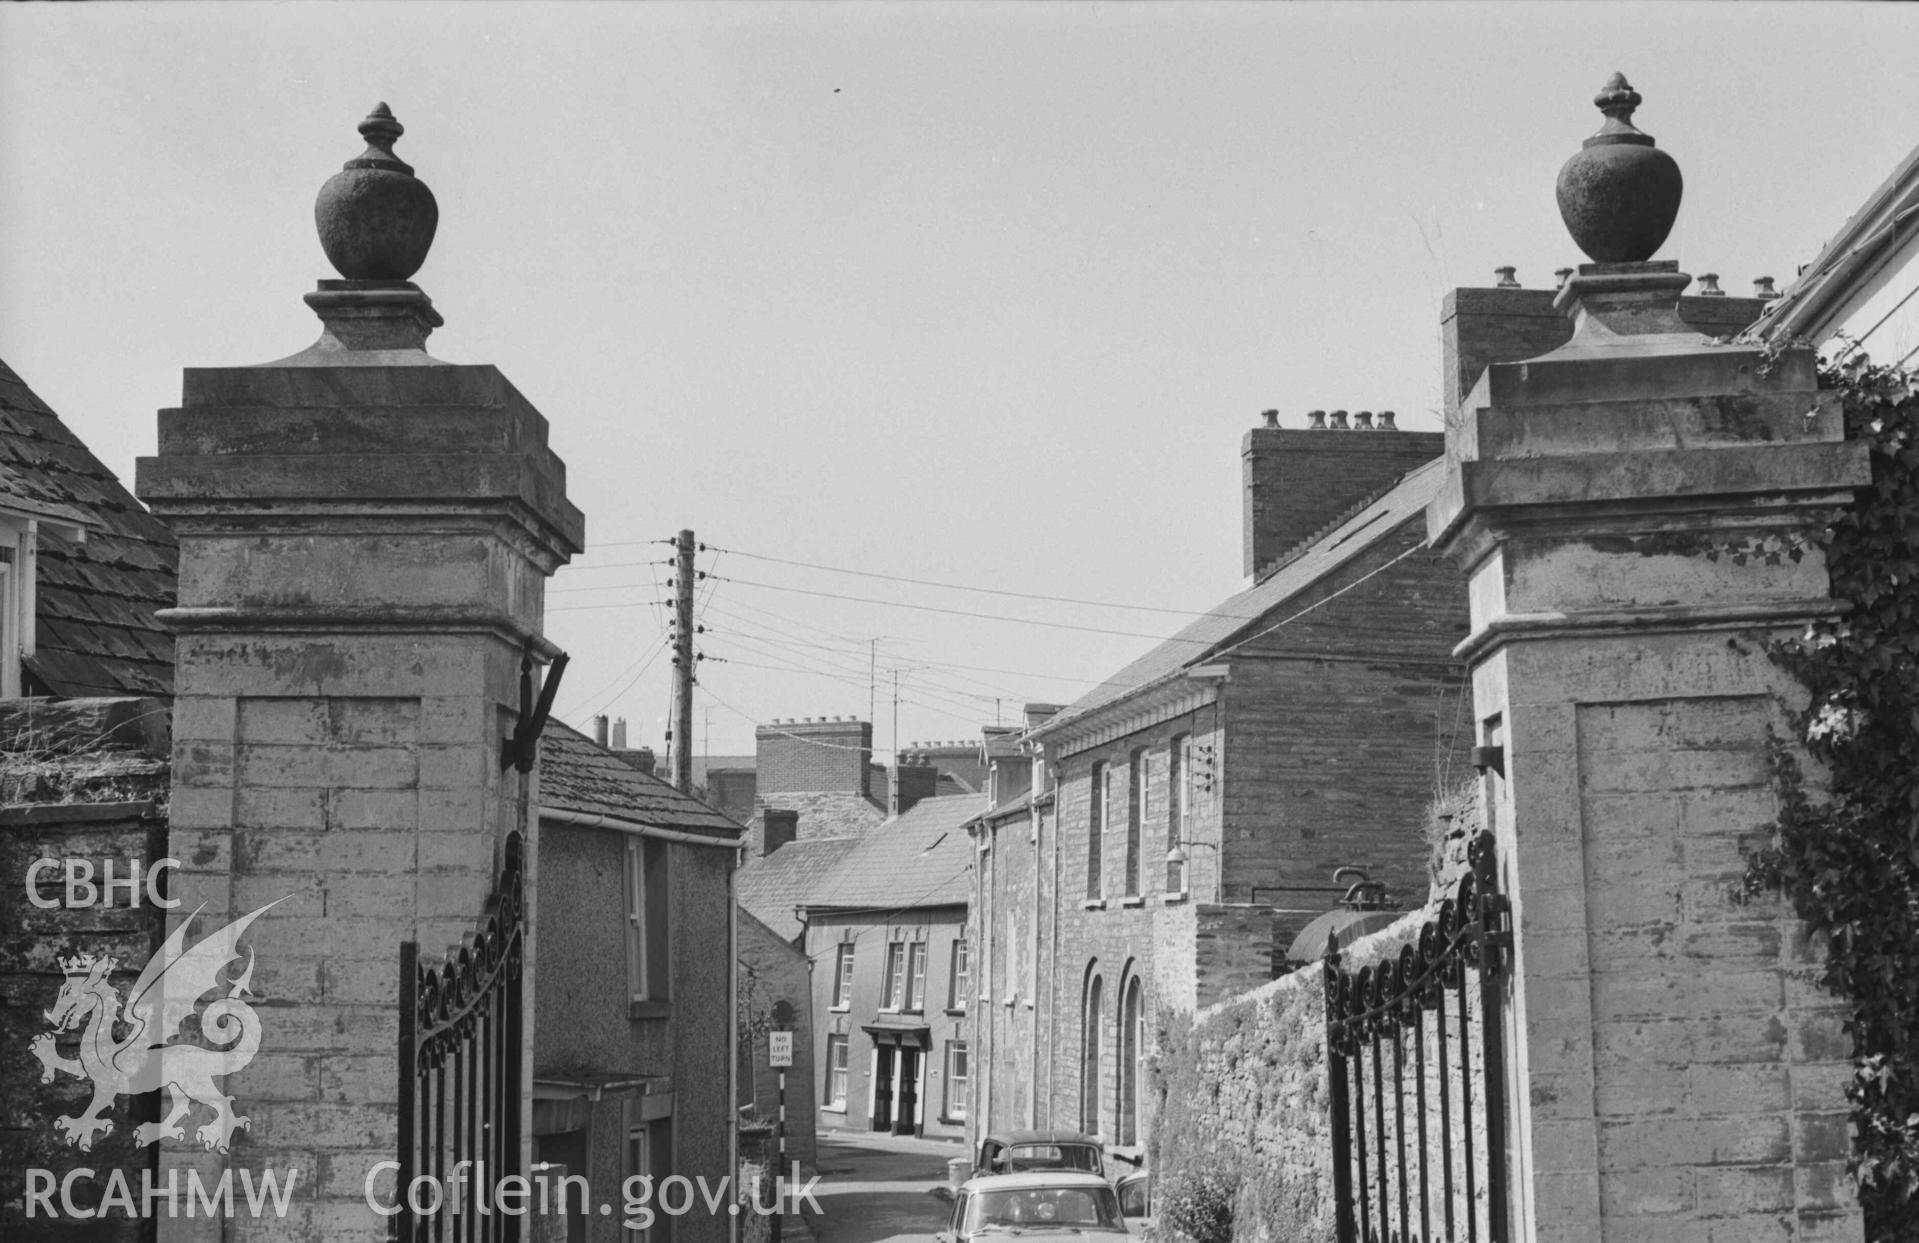 Digital copy of a black and white negative showing view looking out of the gateway at the south west corner of St Mary's Church yard, Cardigan. Photographed by Arthur Chater on 30 August 1968. Looking west from Grid Reference SN 1804 4602.